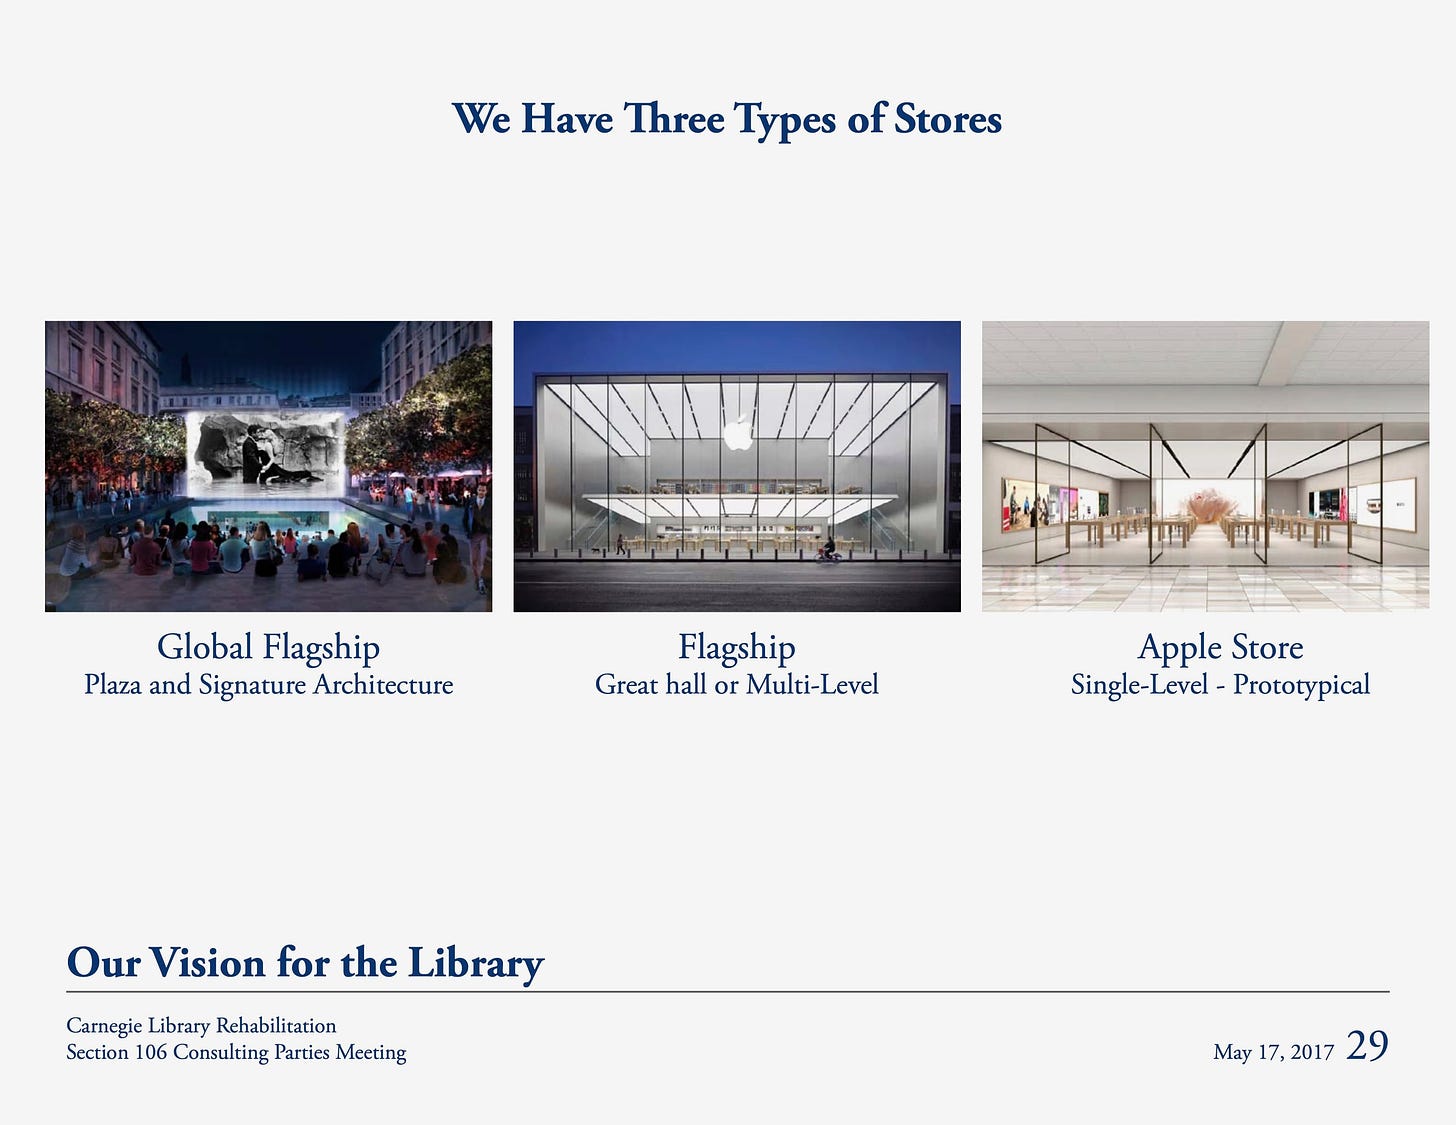 We Have Three Types of Stores: Global Flagship (Plaza and Signature Architecture), Flagship (Great hall or Multi-Level), Apple Store (Single-Level - Prototypical)